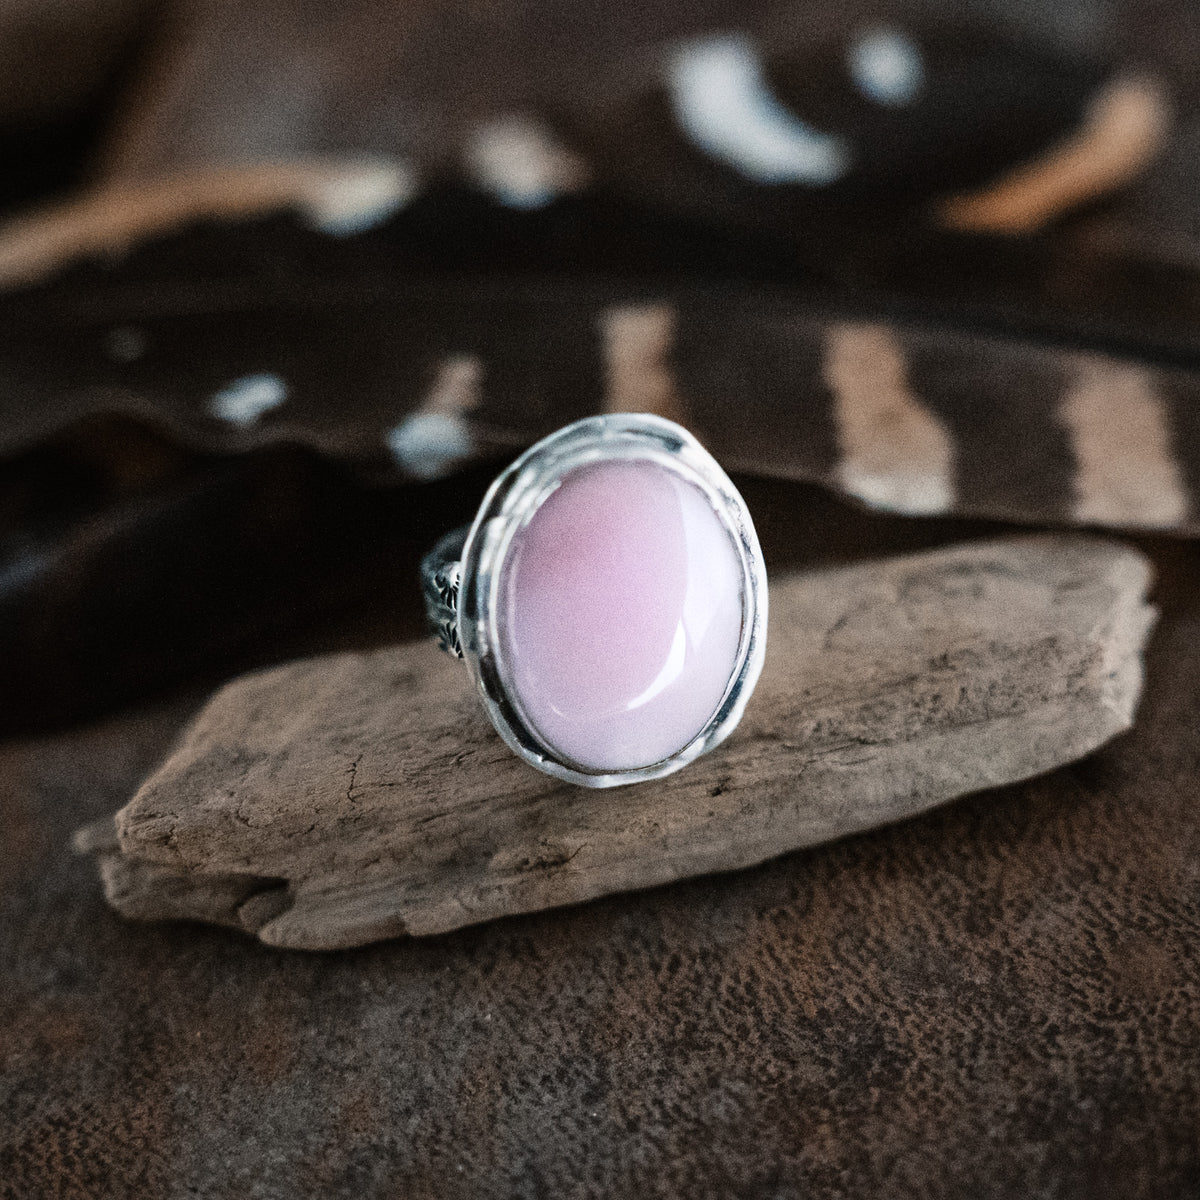 Bubble Gum Ring- Pink Opal- Size 8